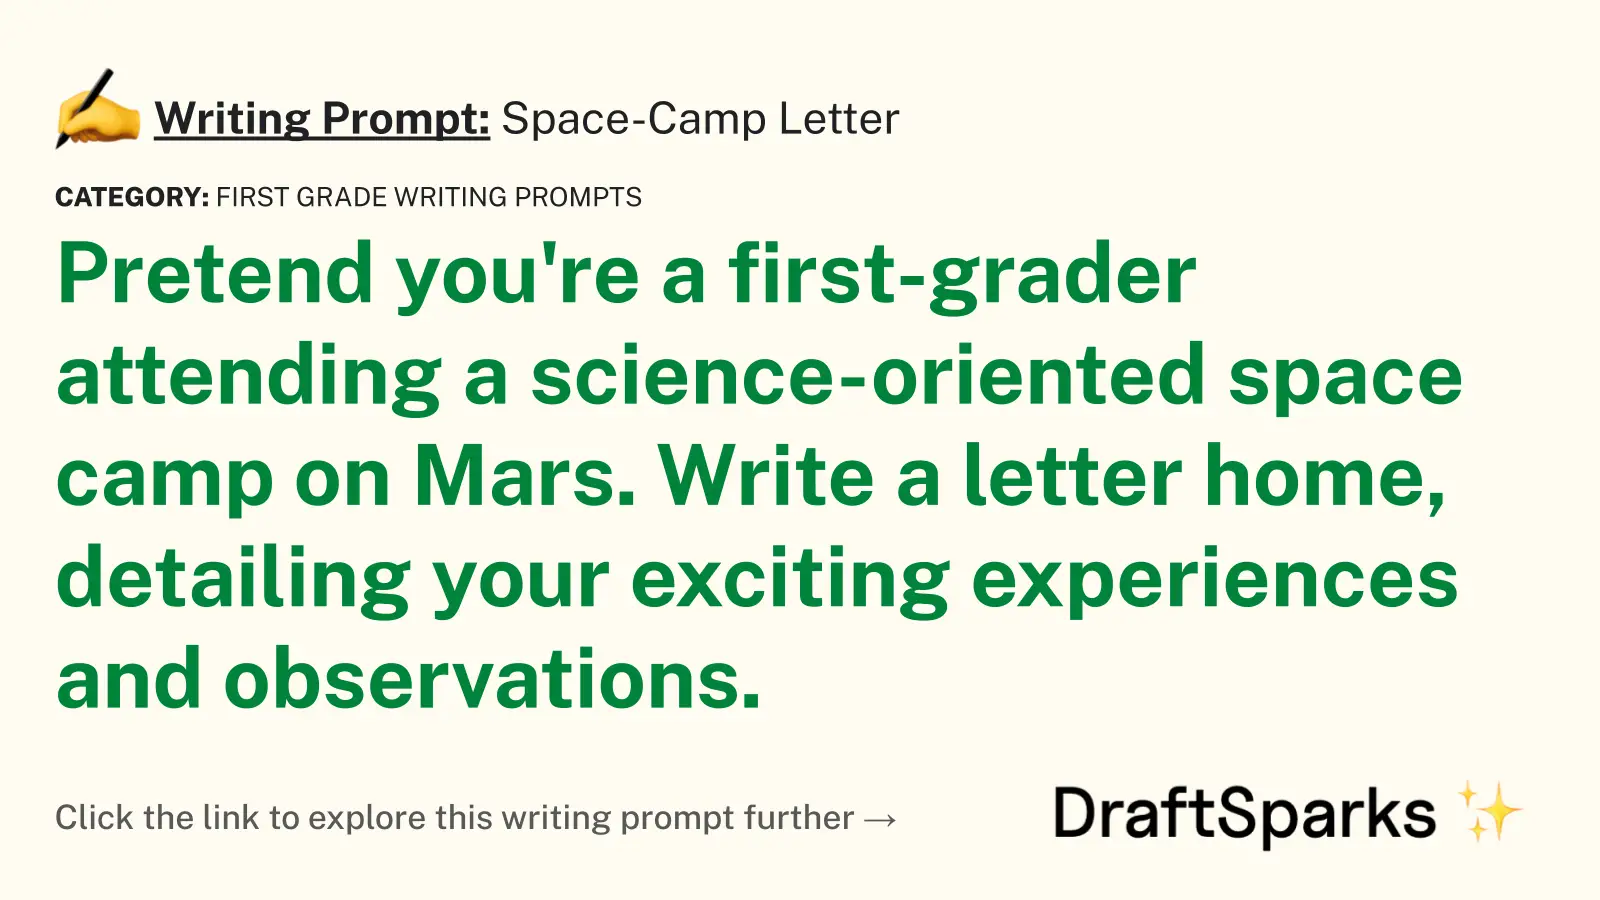 Space-Camp Letter